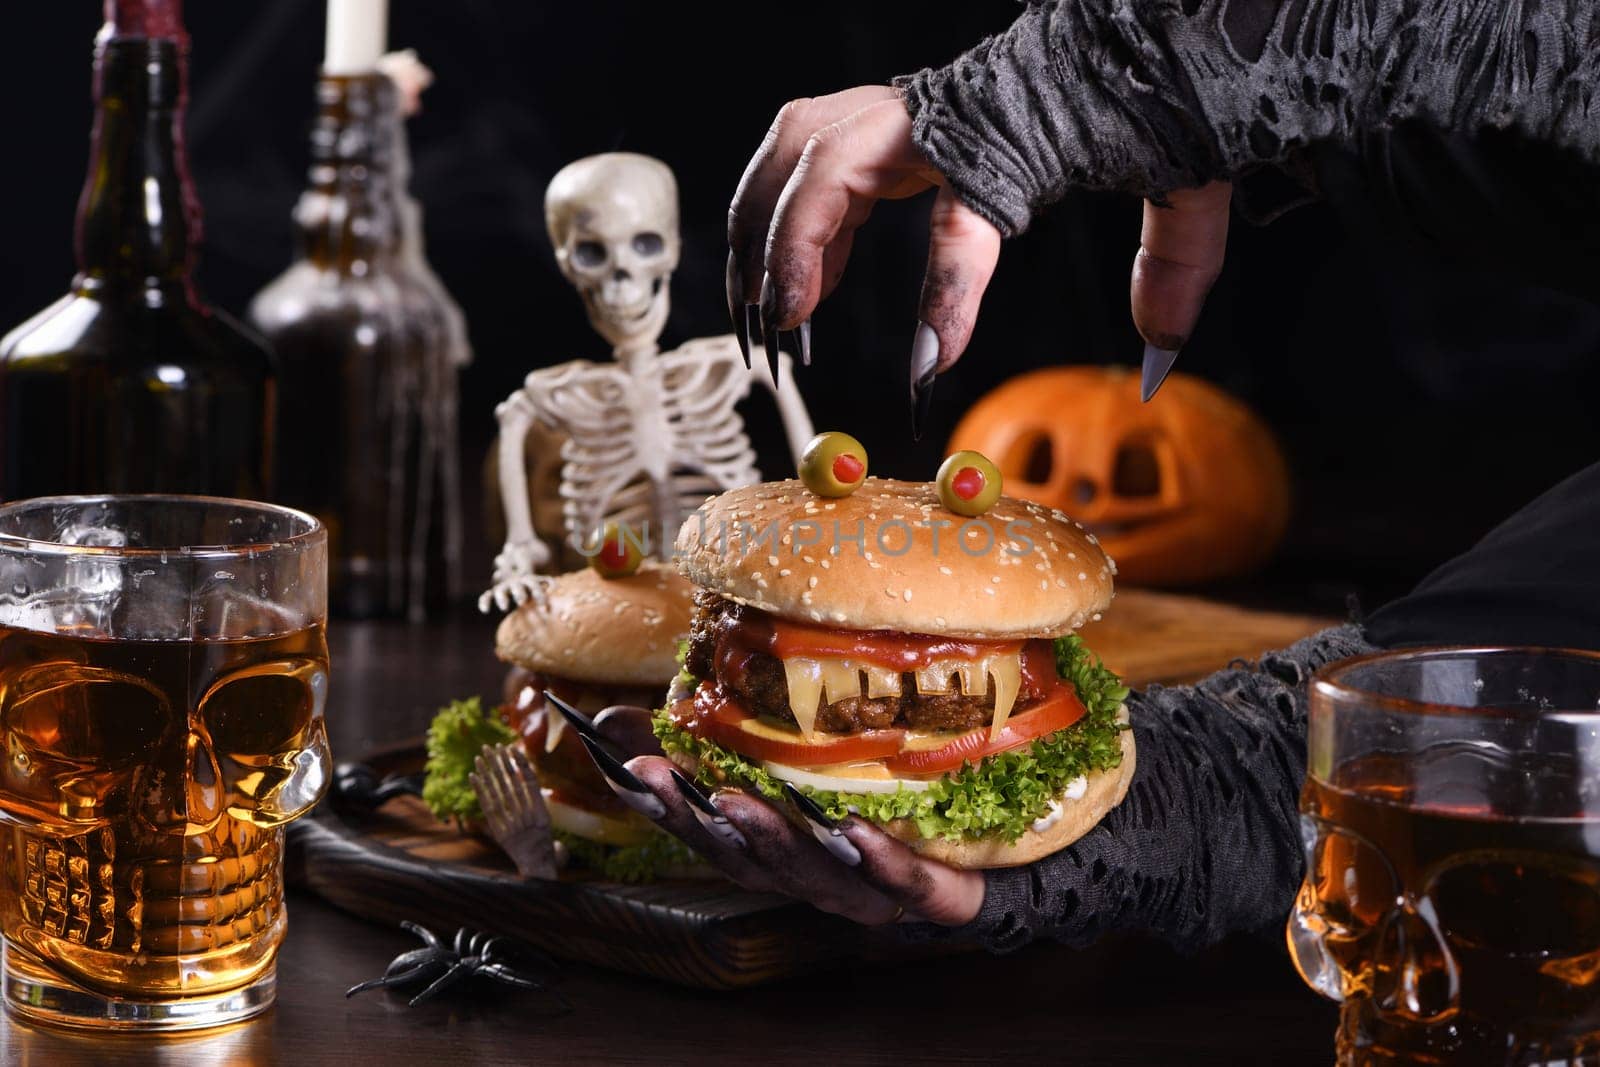  Halloween Monster Burger by Apolonia